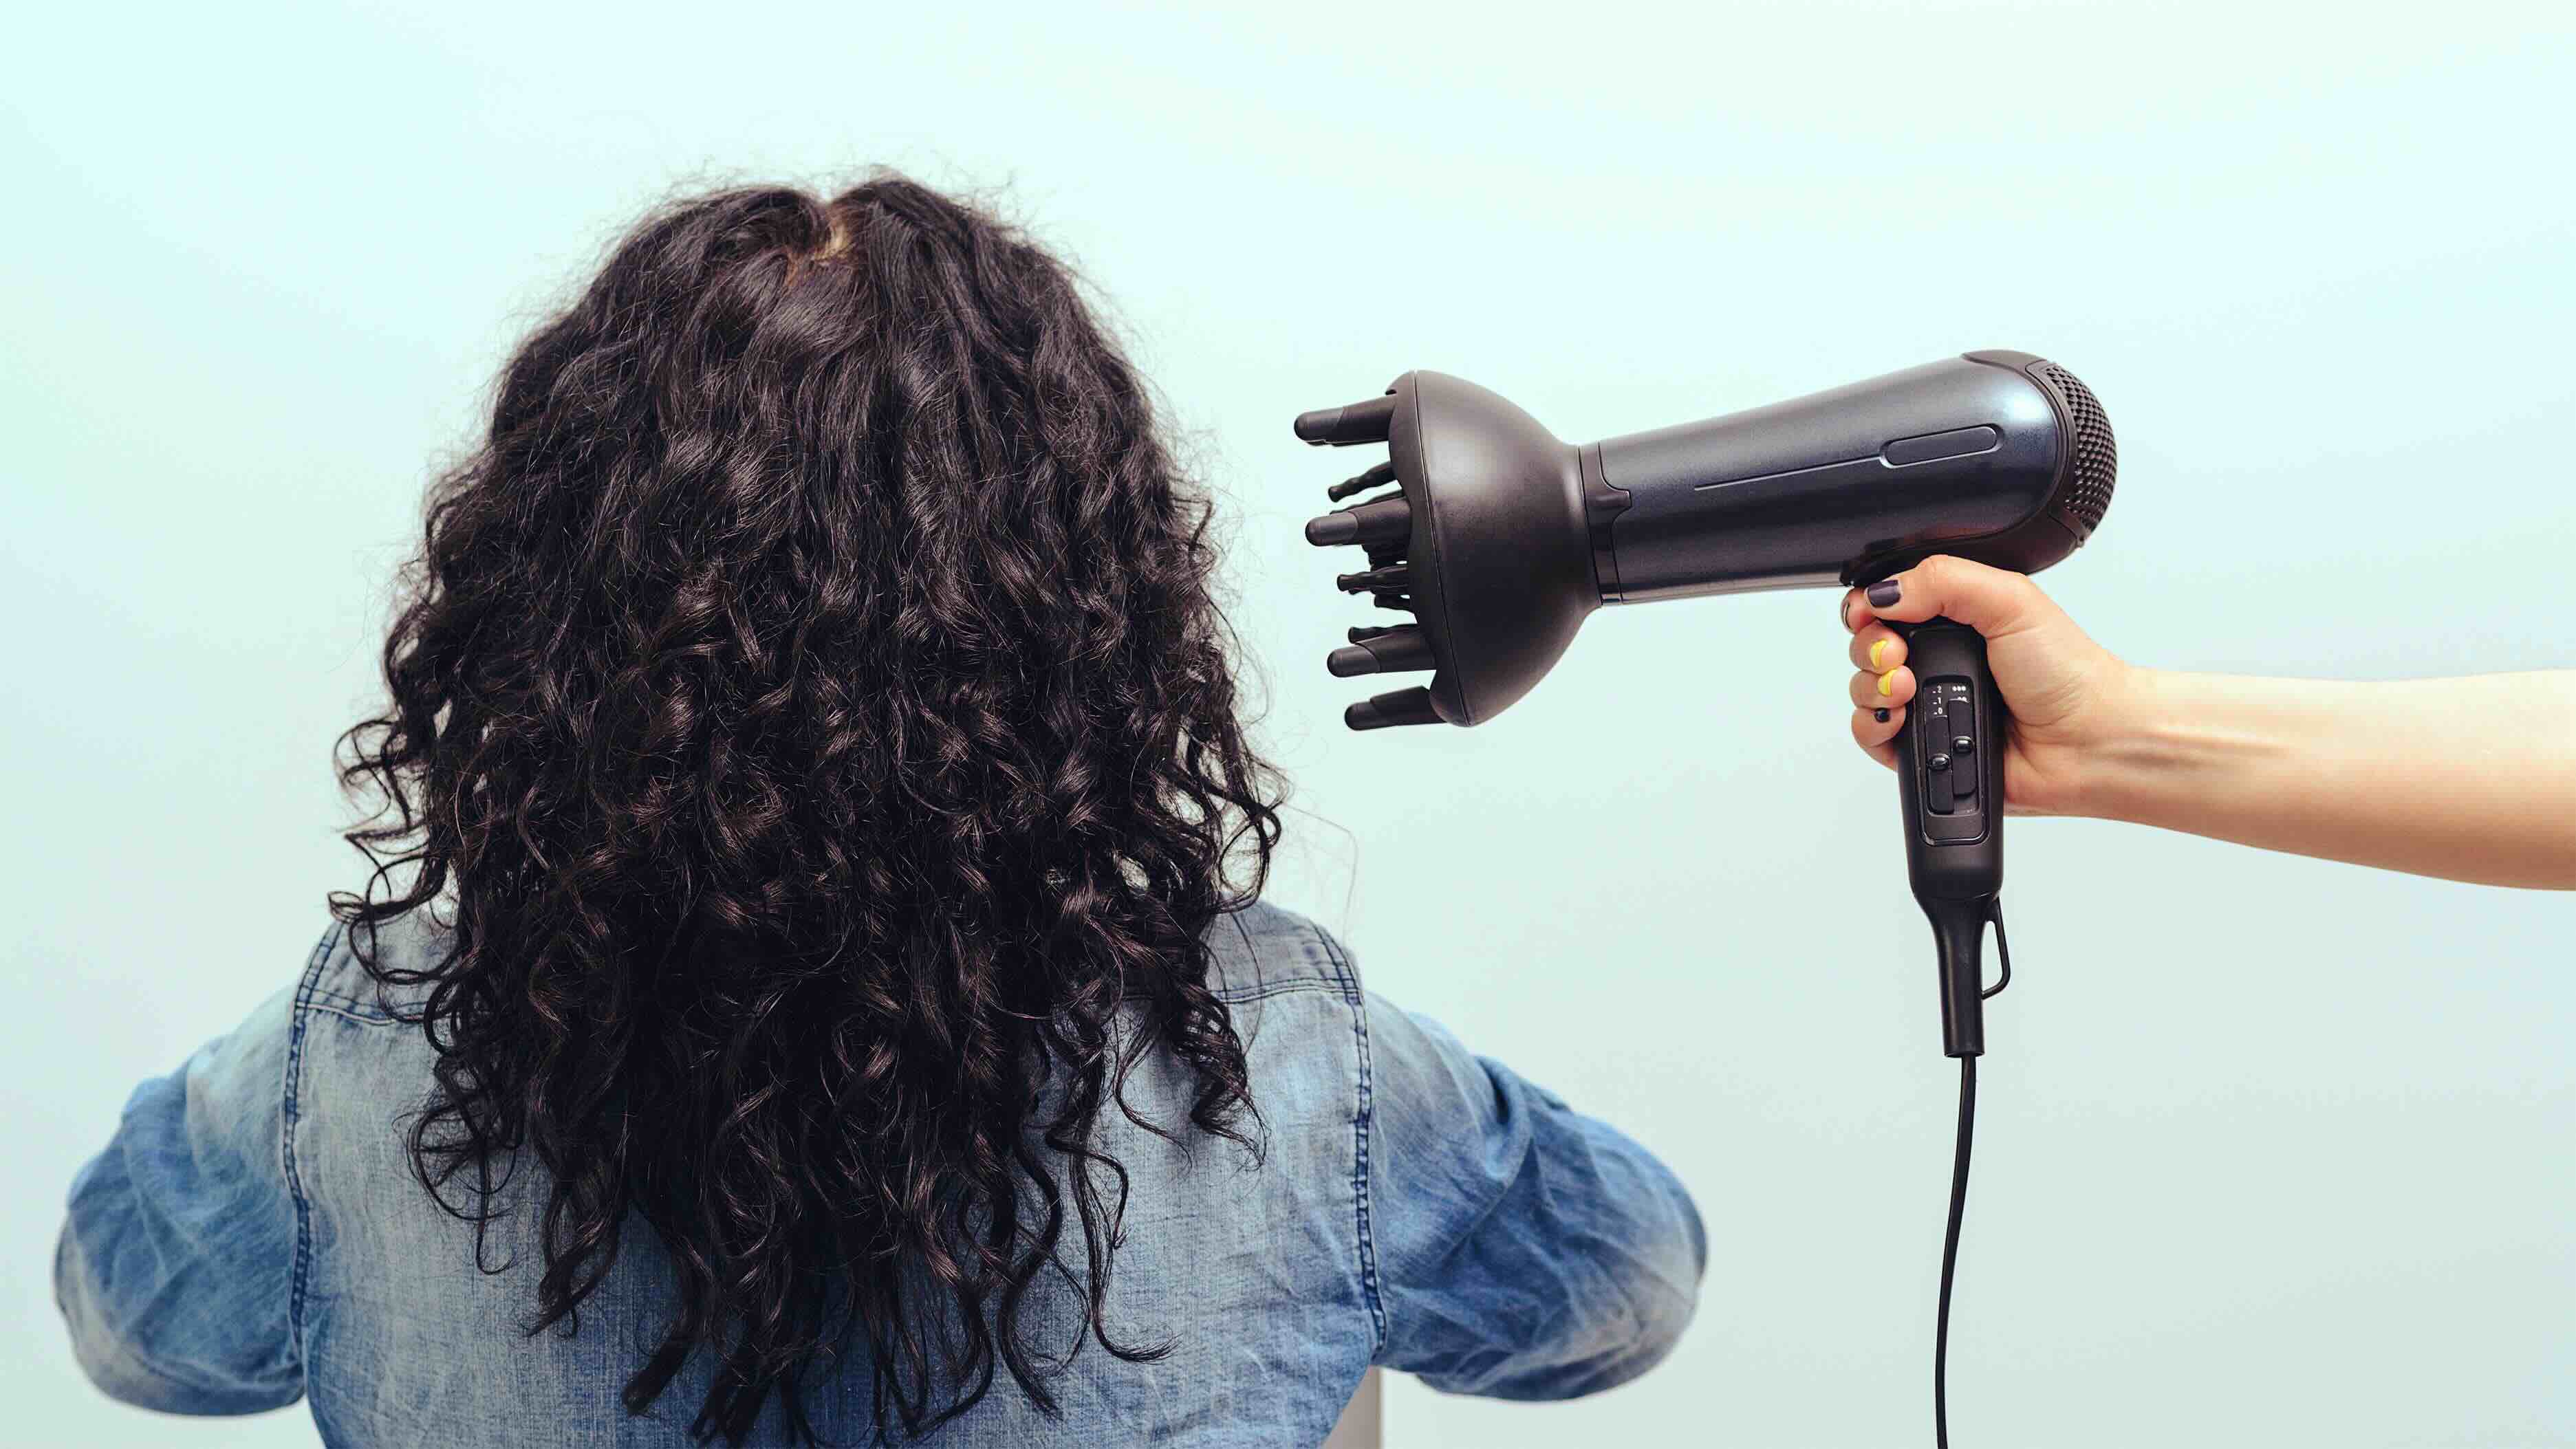 What Is A Diffuser On A Hair Dryer